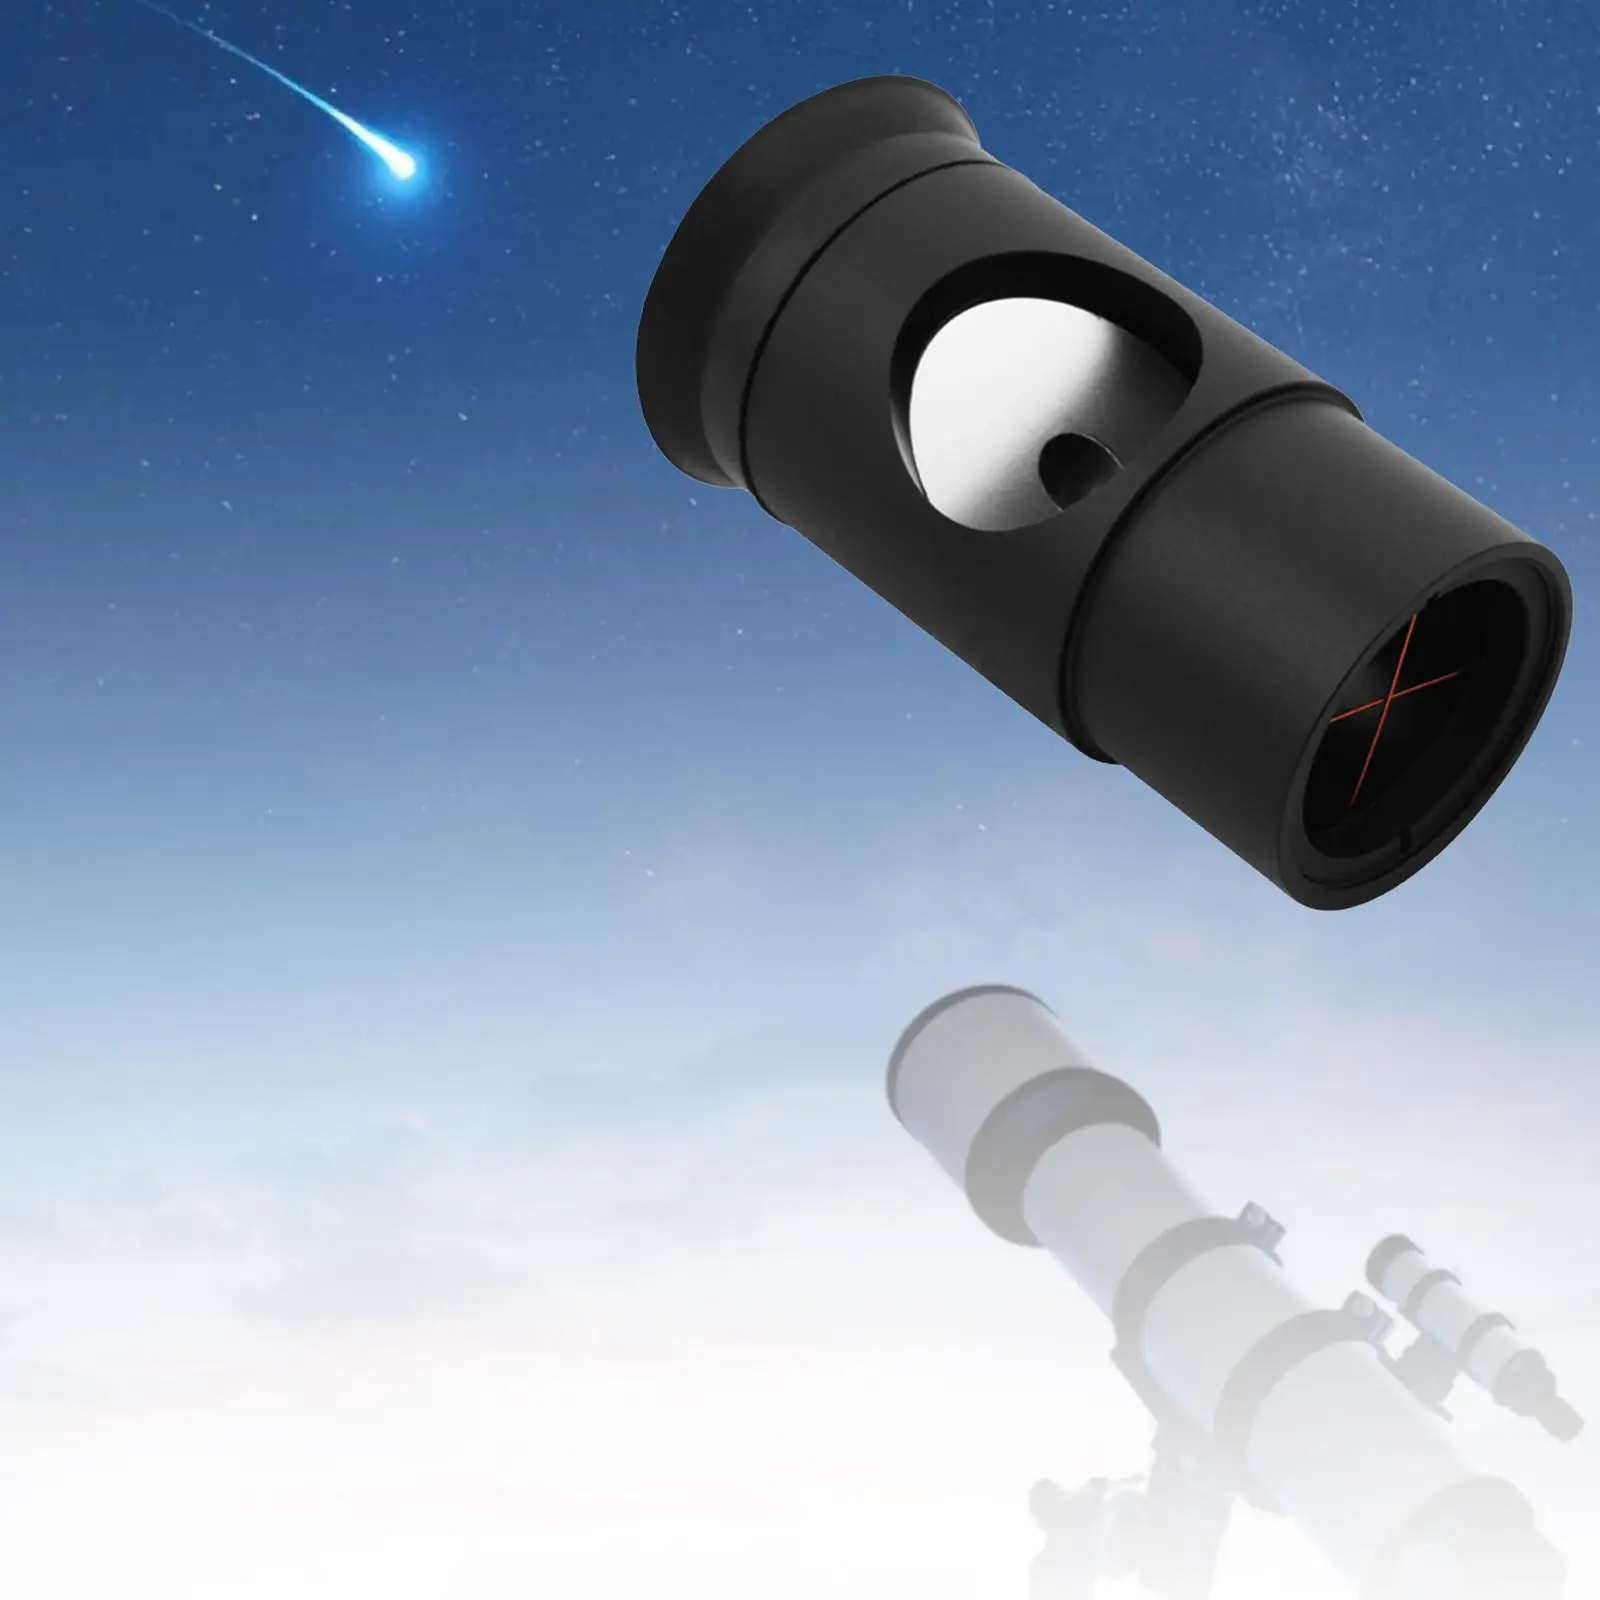 1.25in Replacement Easy to Install Eyepiece Optical Shaft Collimator for Schmidt Cassegrain Telescopes Newtonian Reflectors